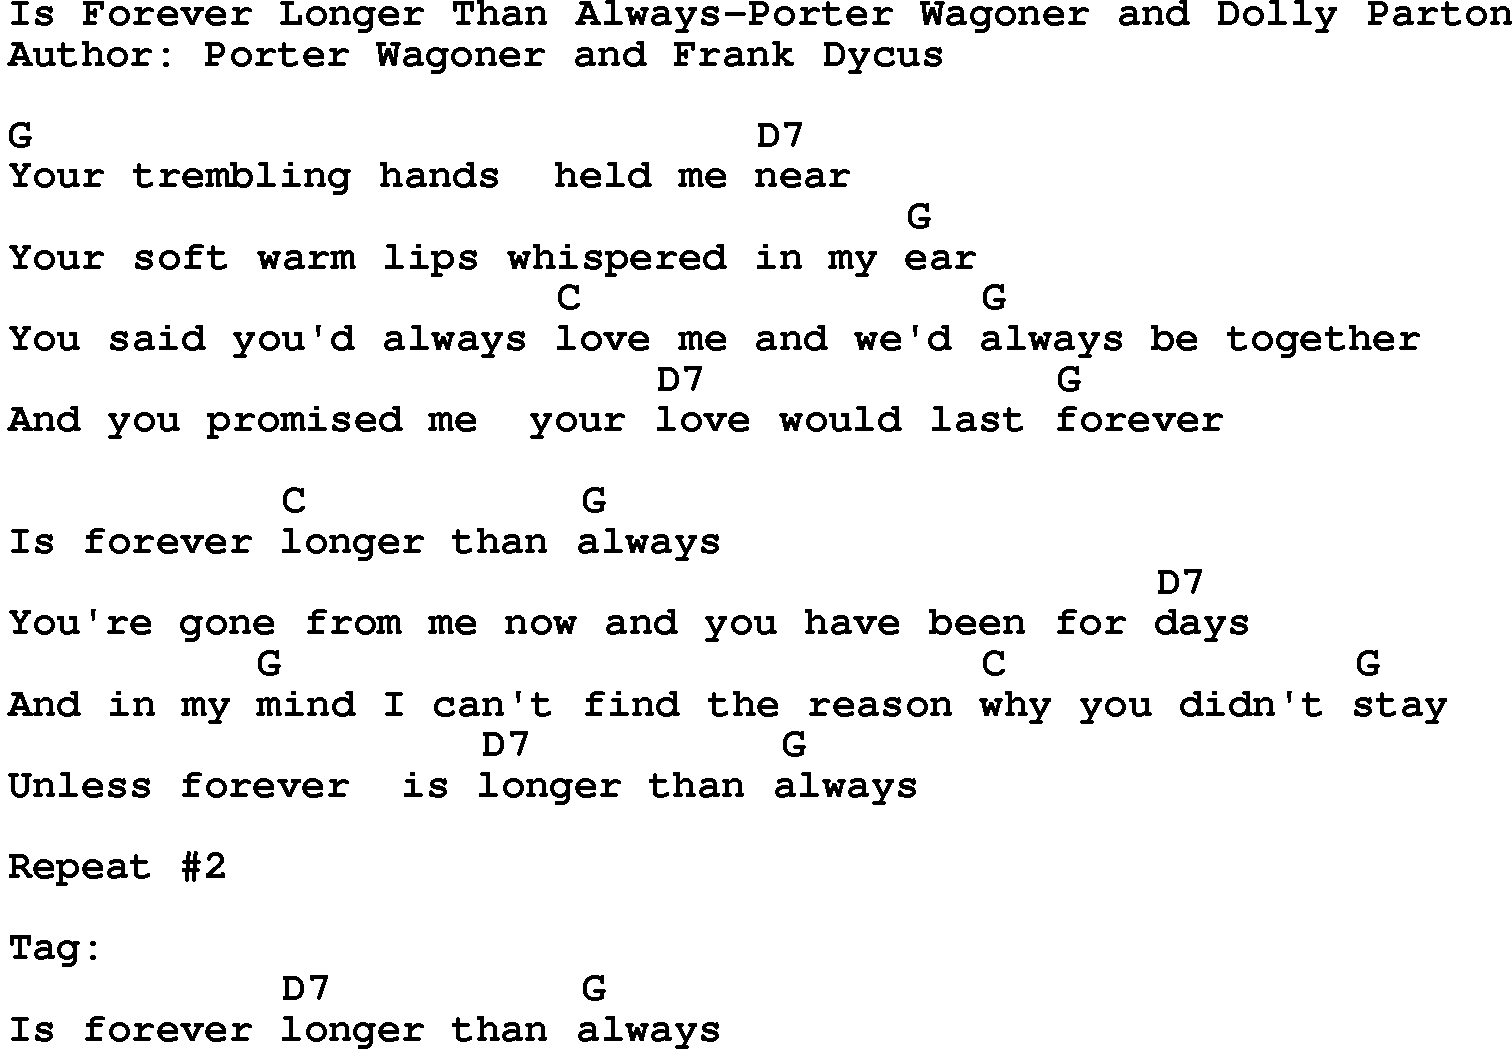 Country music song: Is Forever Longer Than Always-Porter Wagoner And Dolly Parton lyrics and chords